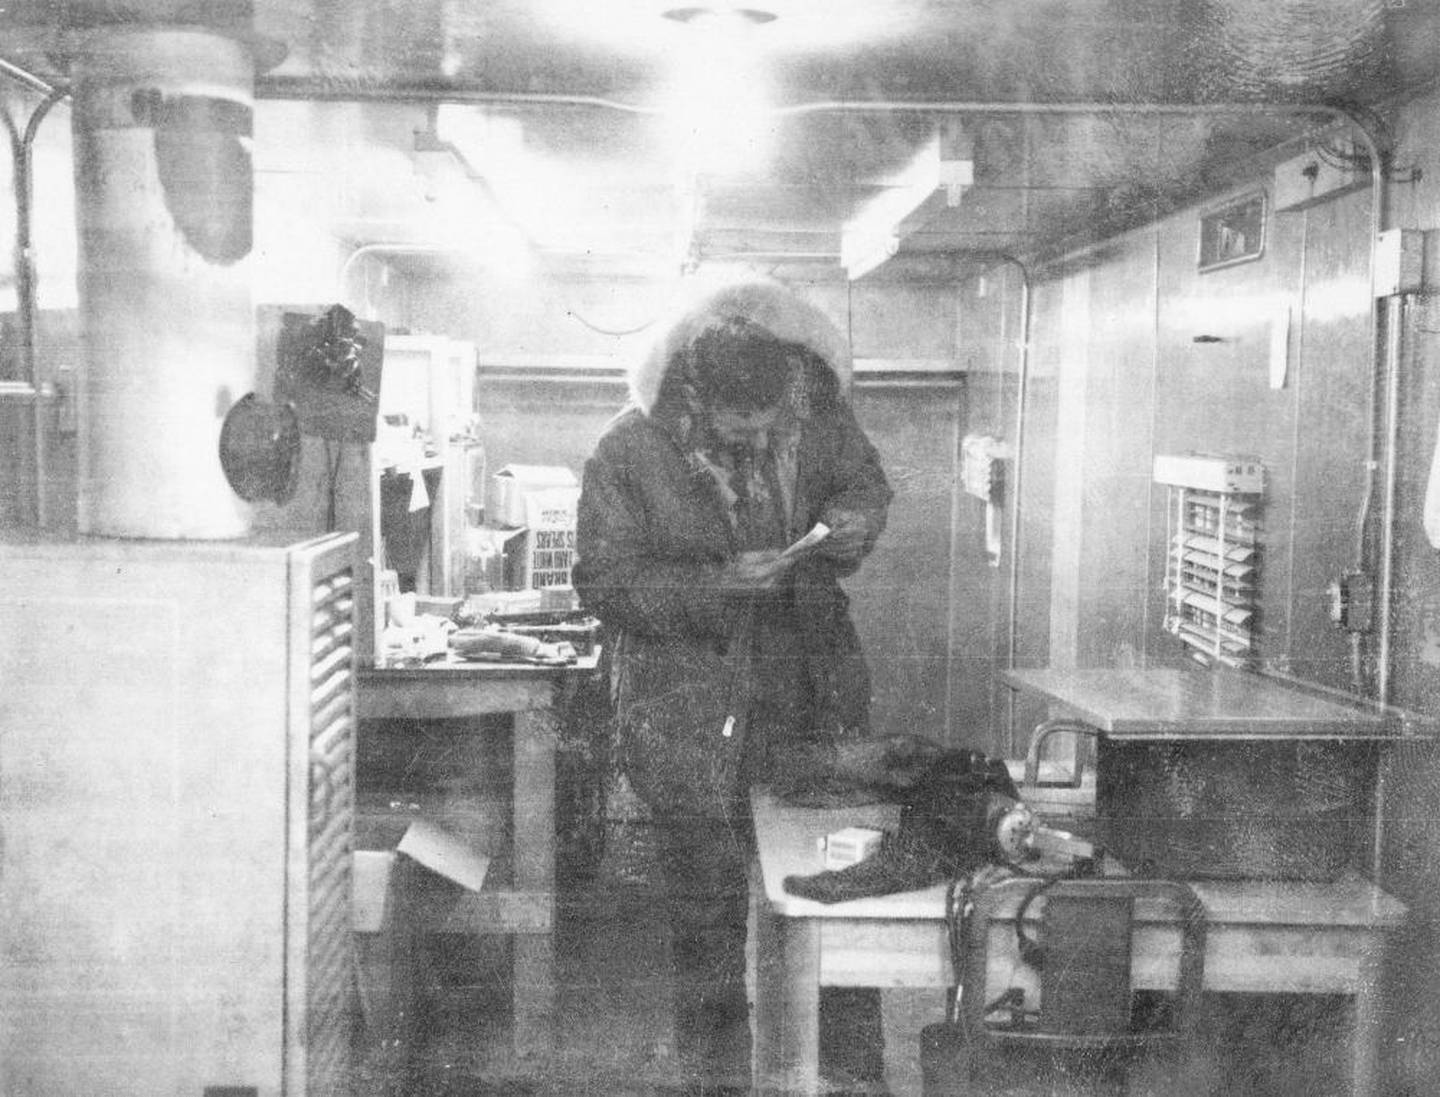 Art Lachenbruch in the USGS living quarters on T-3 Ice Island on Feb. 26, 1963